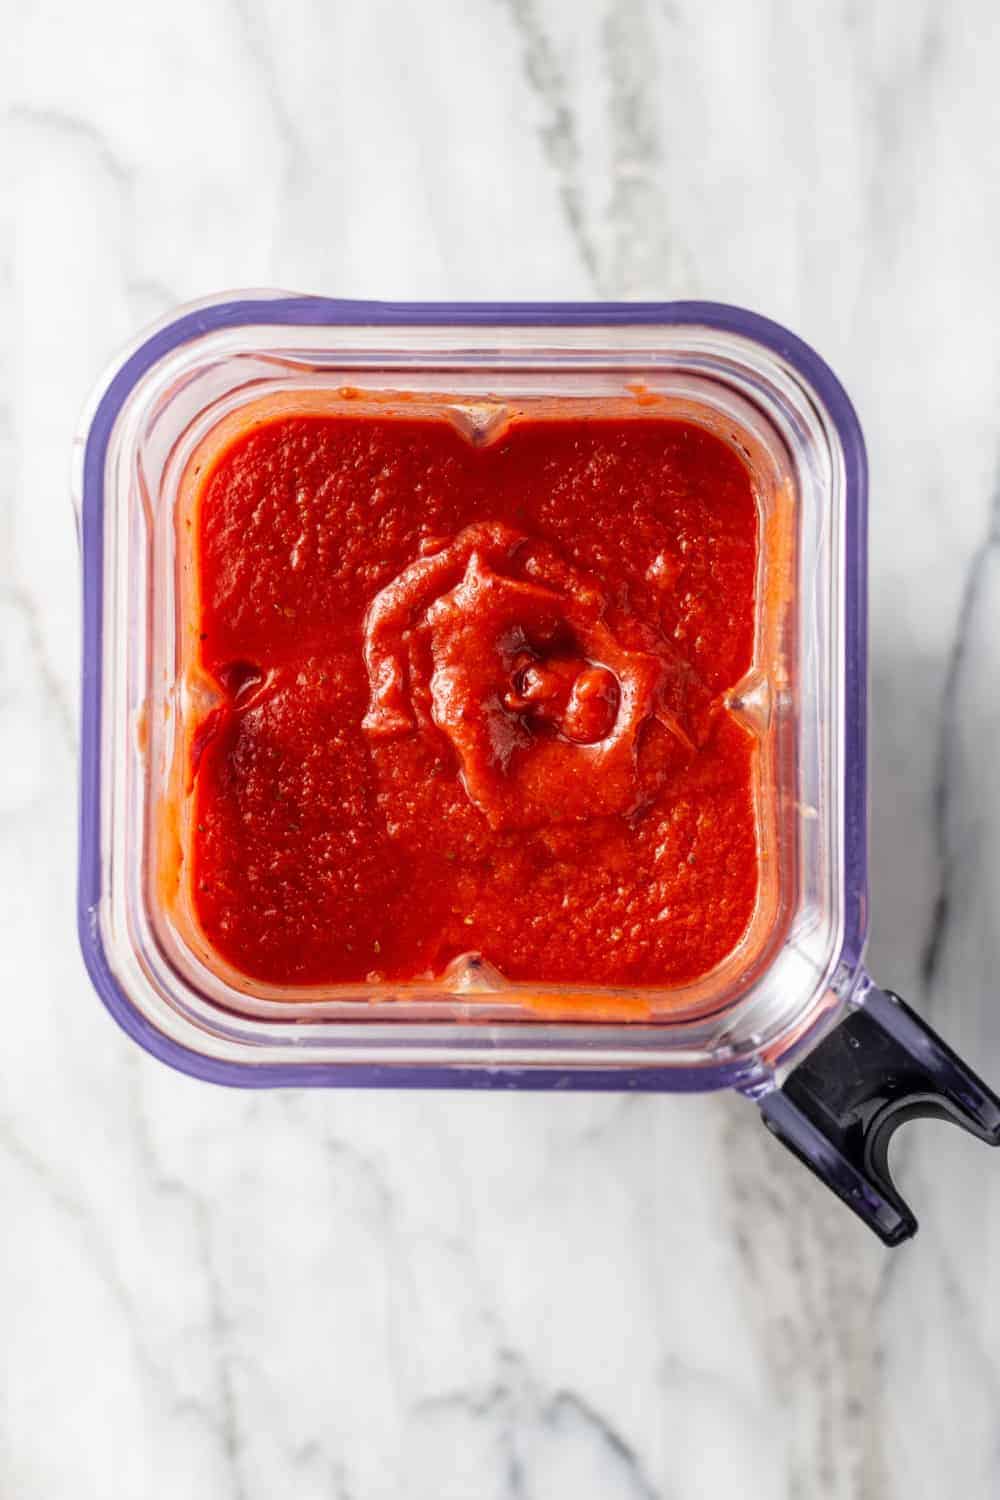 Overhead view of tomato sauce in a blender on a marble surface